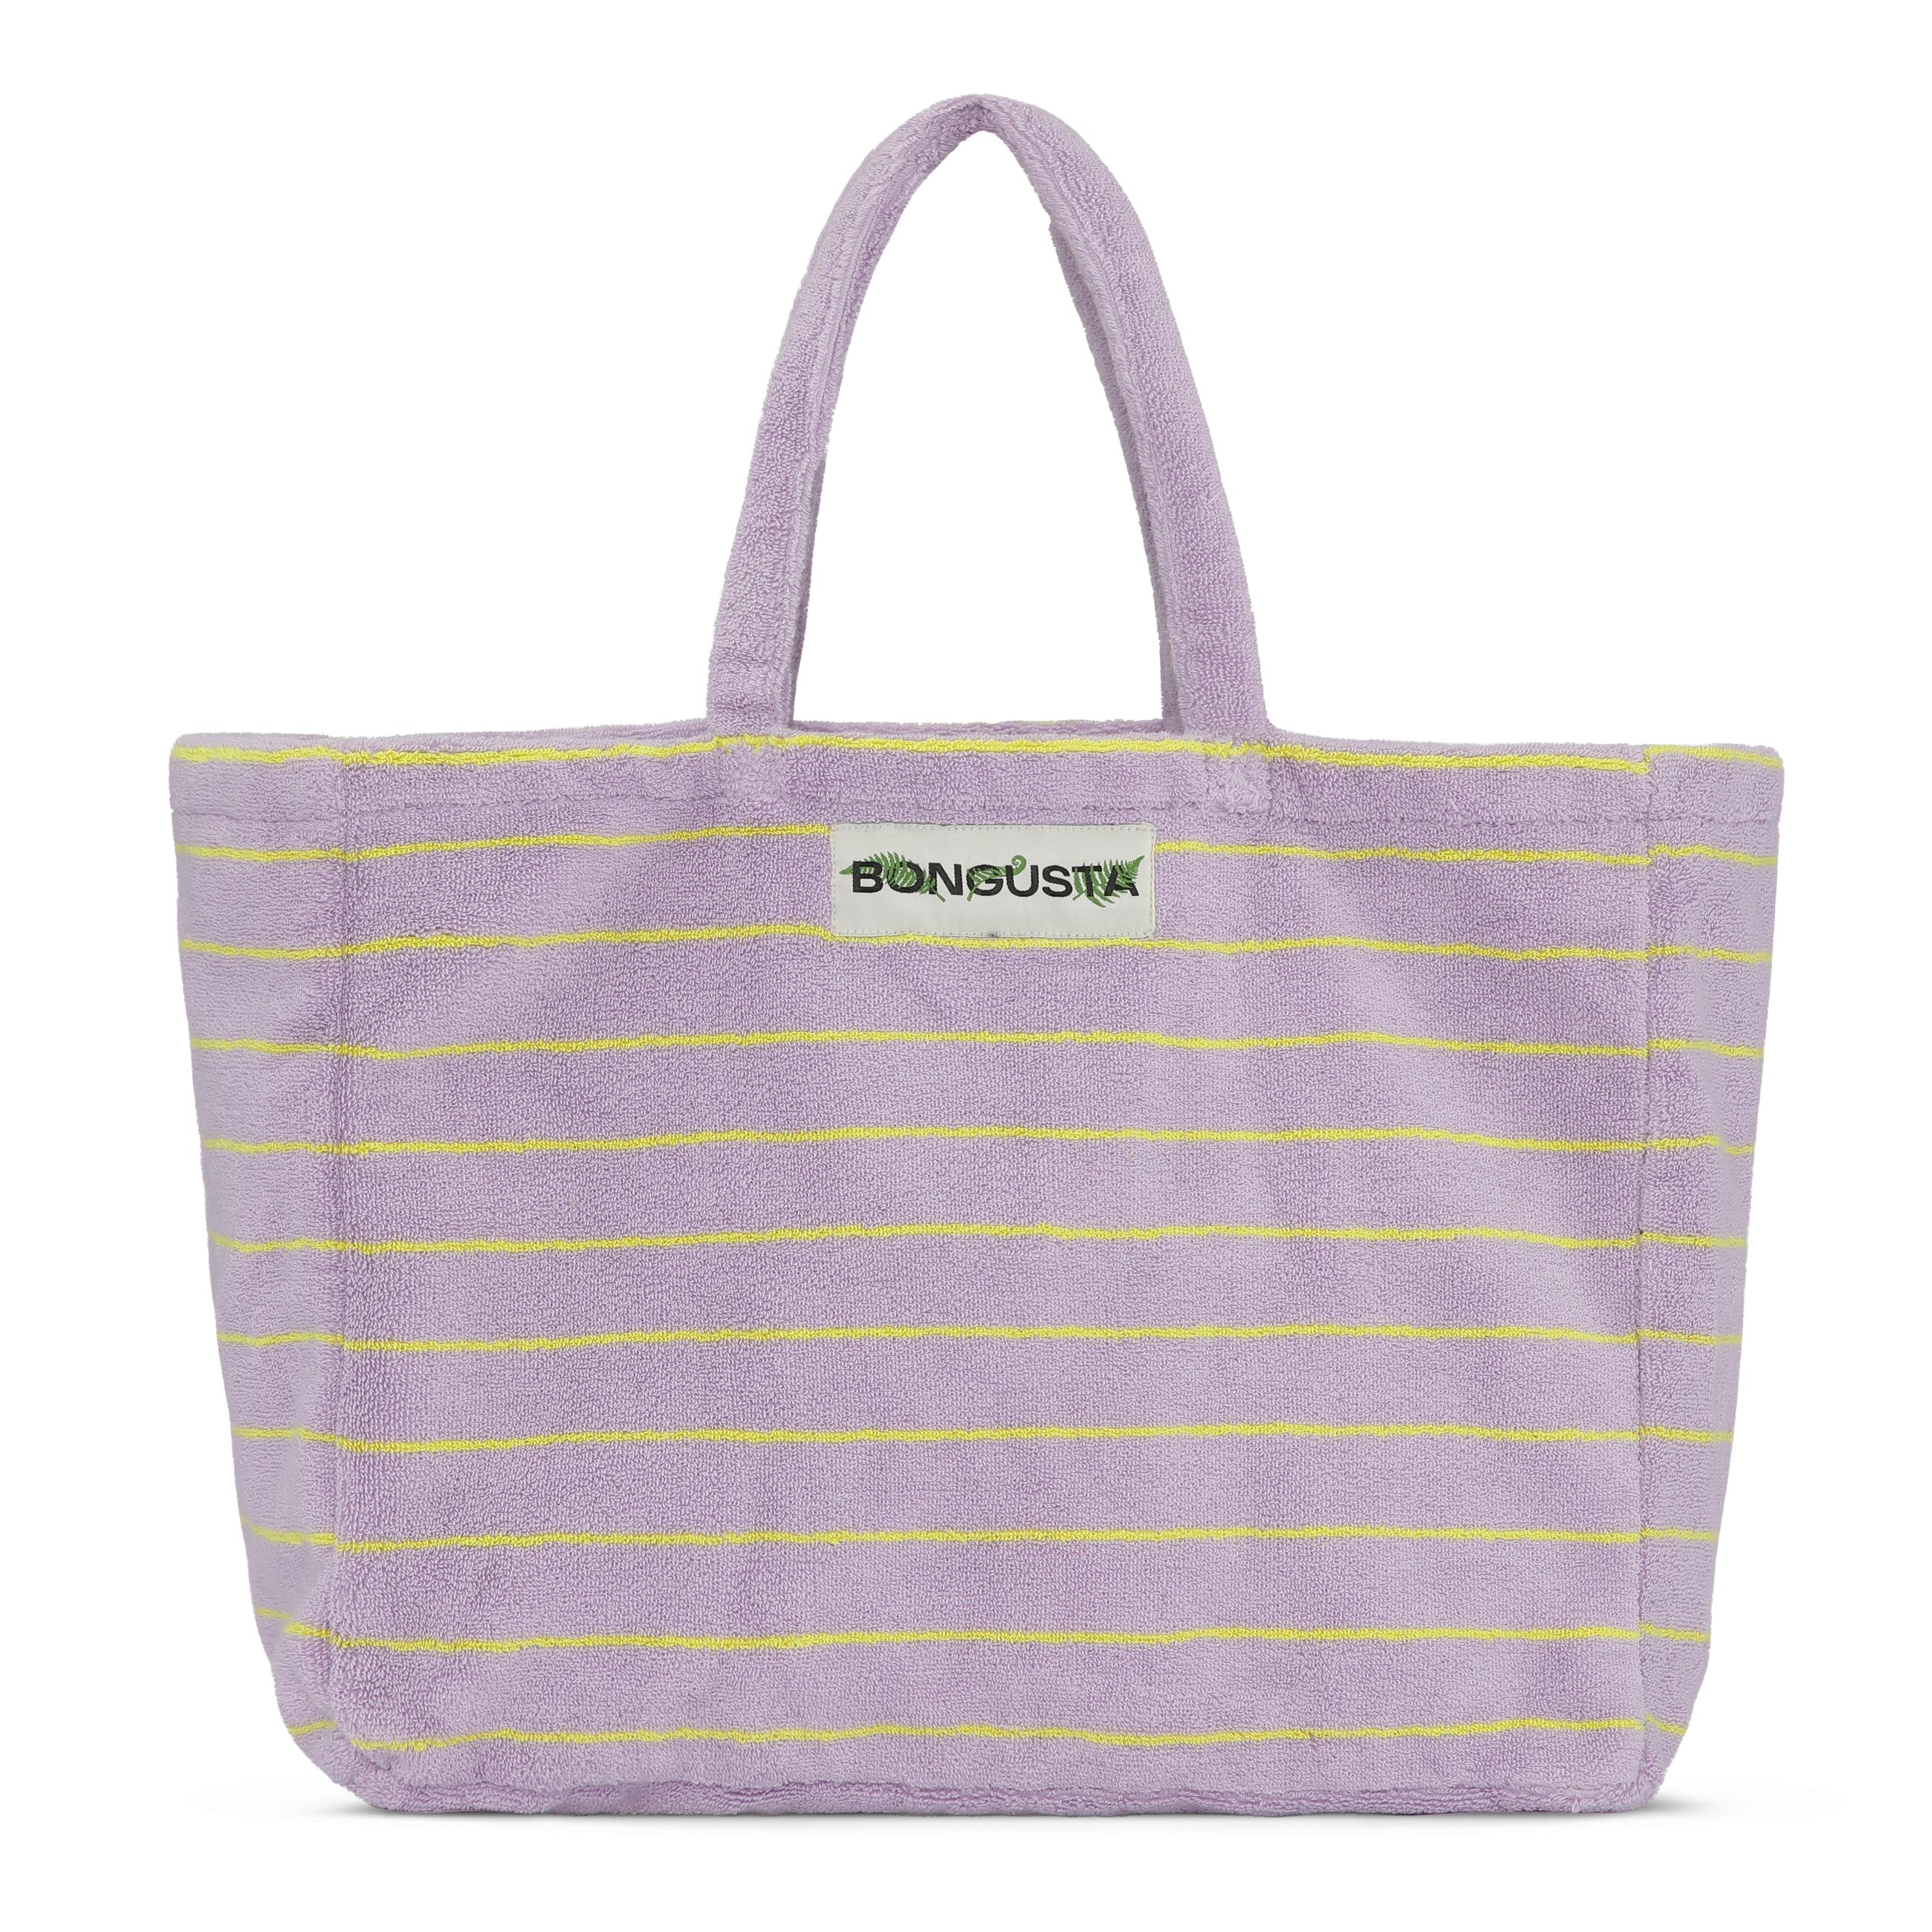 NARAM WEEKEND BAG │ LILAC & NEON – Petites Pommes Classic Floats